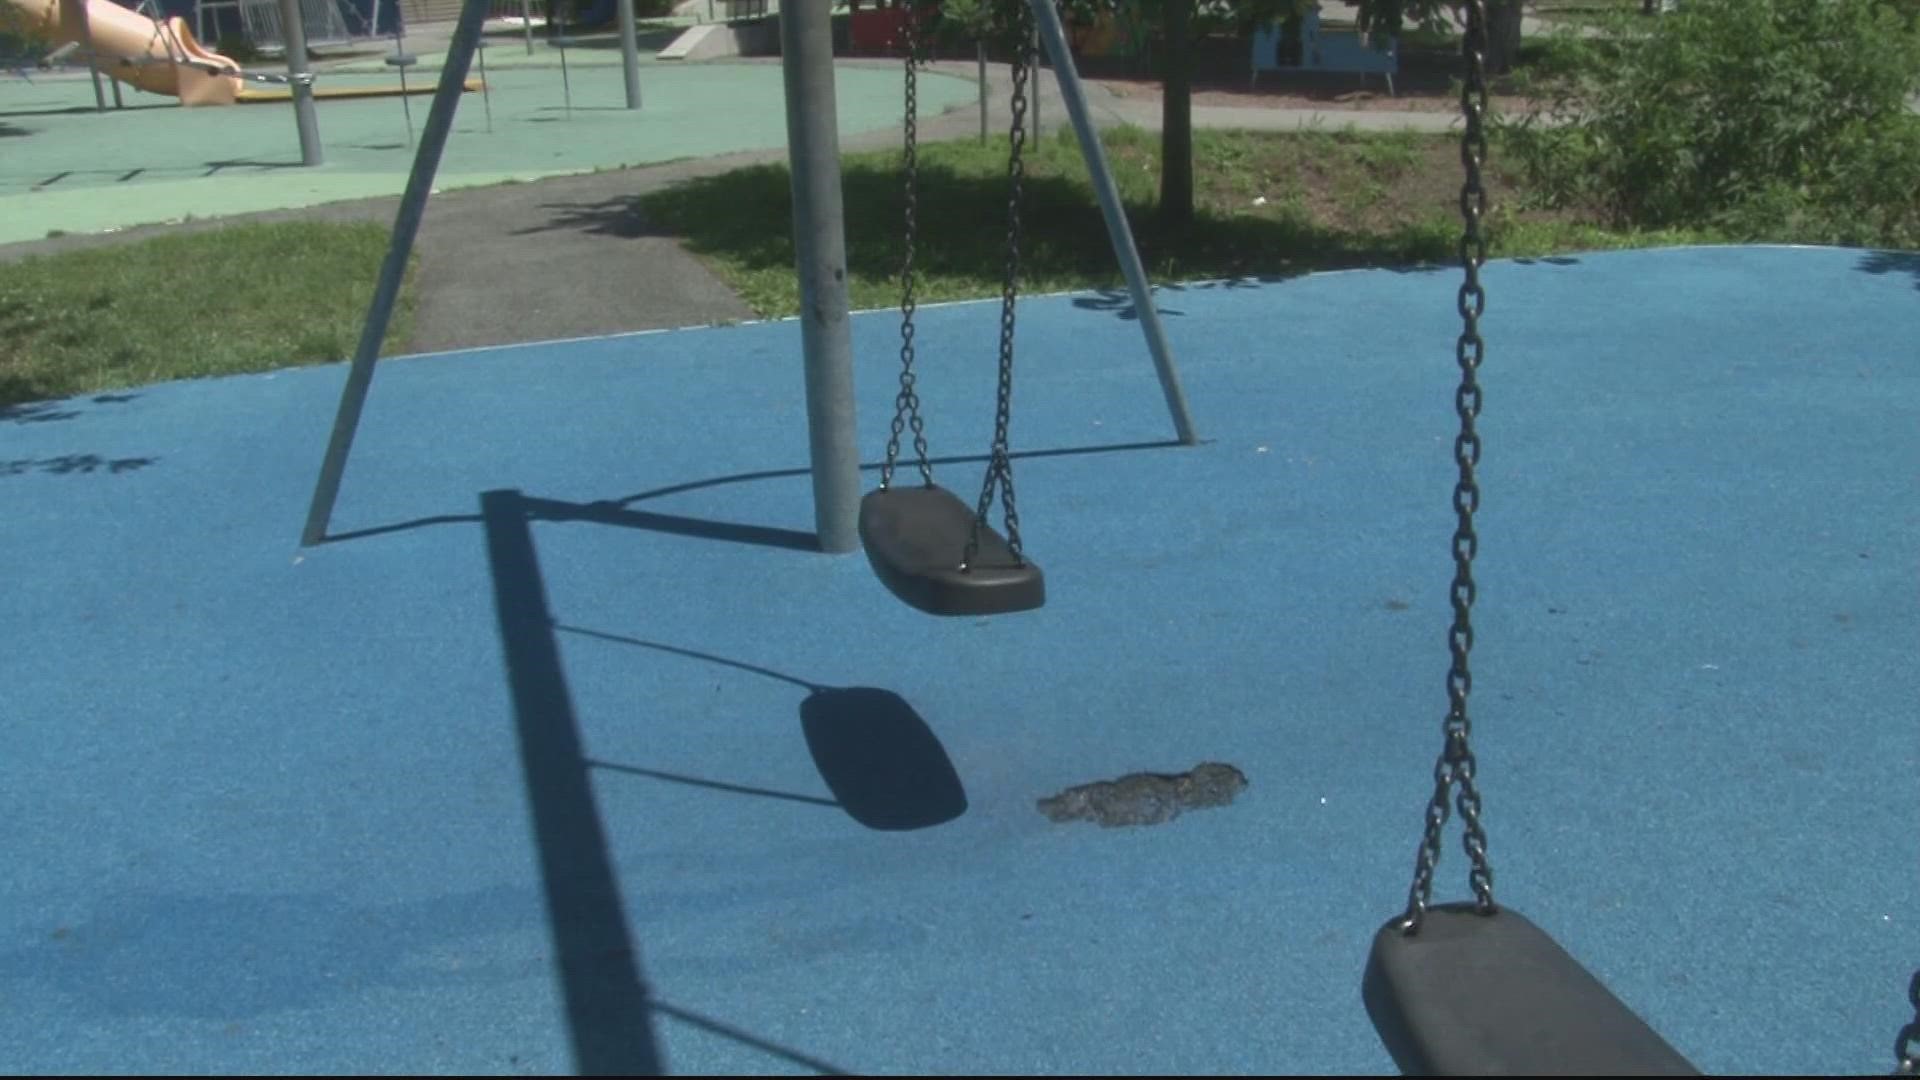 Volunteers with Safe Healthy Playing Fields said dangerous chemicals can be found on some playgrounds around the county.